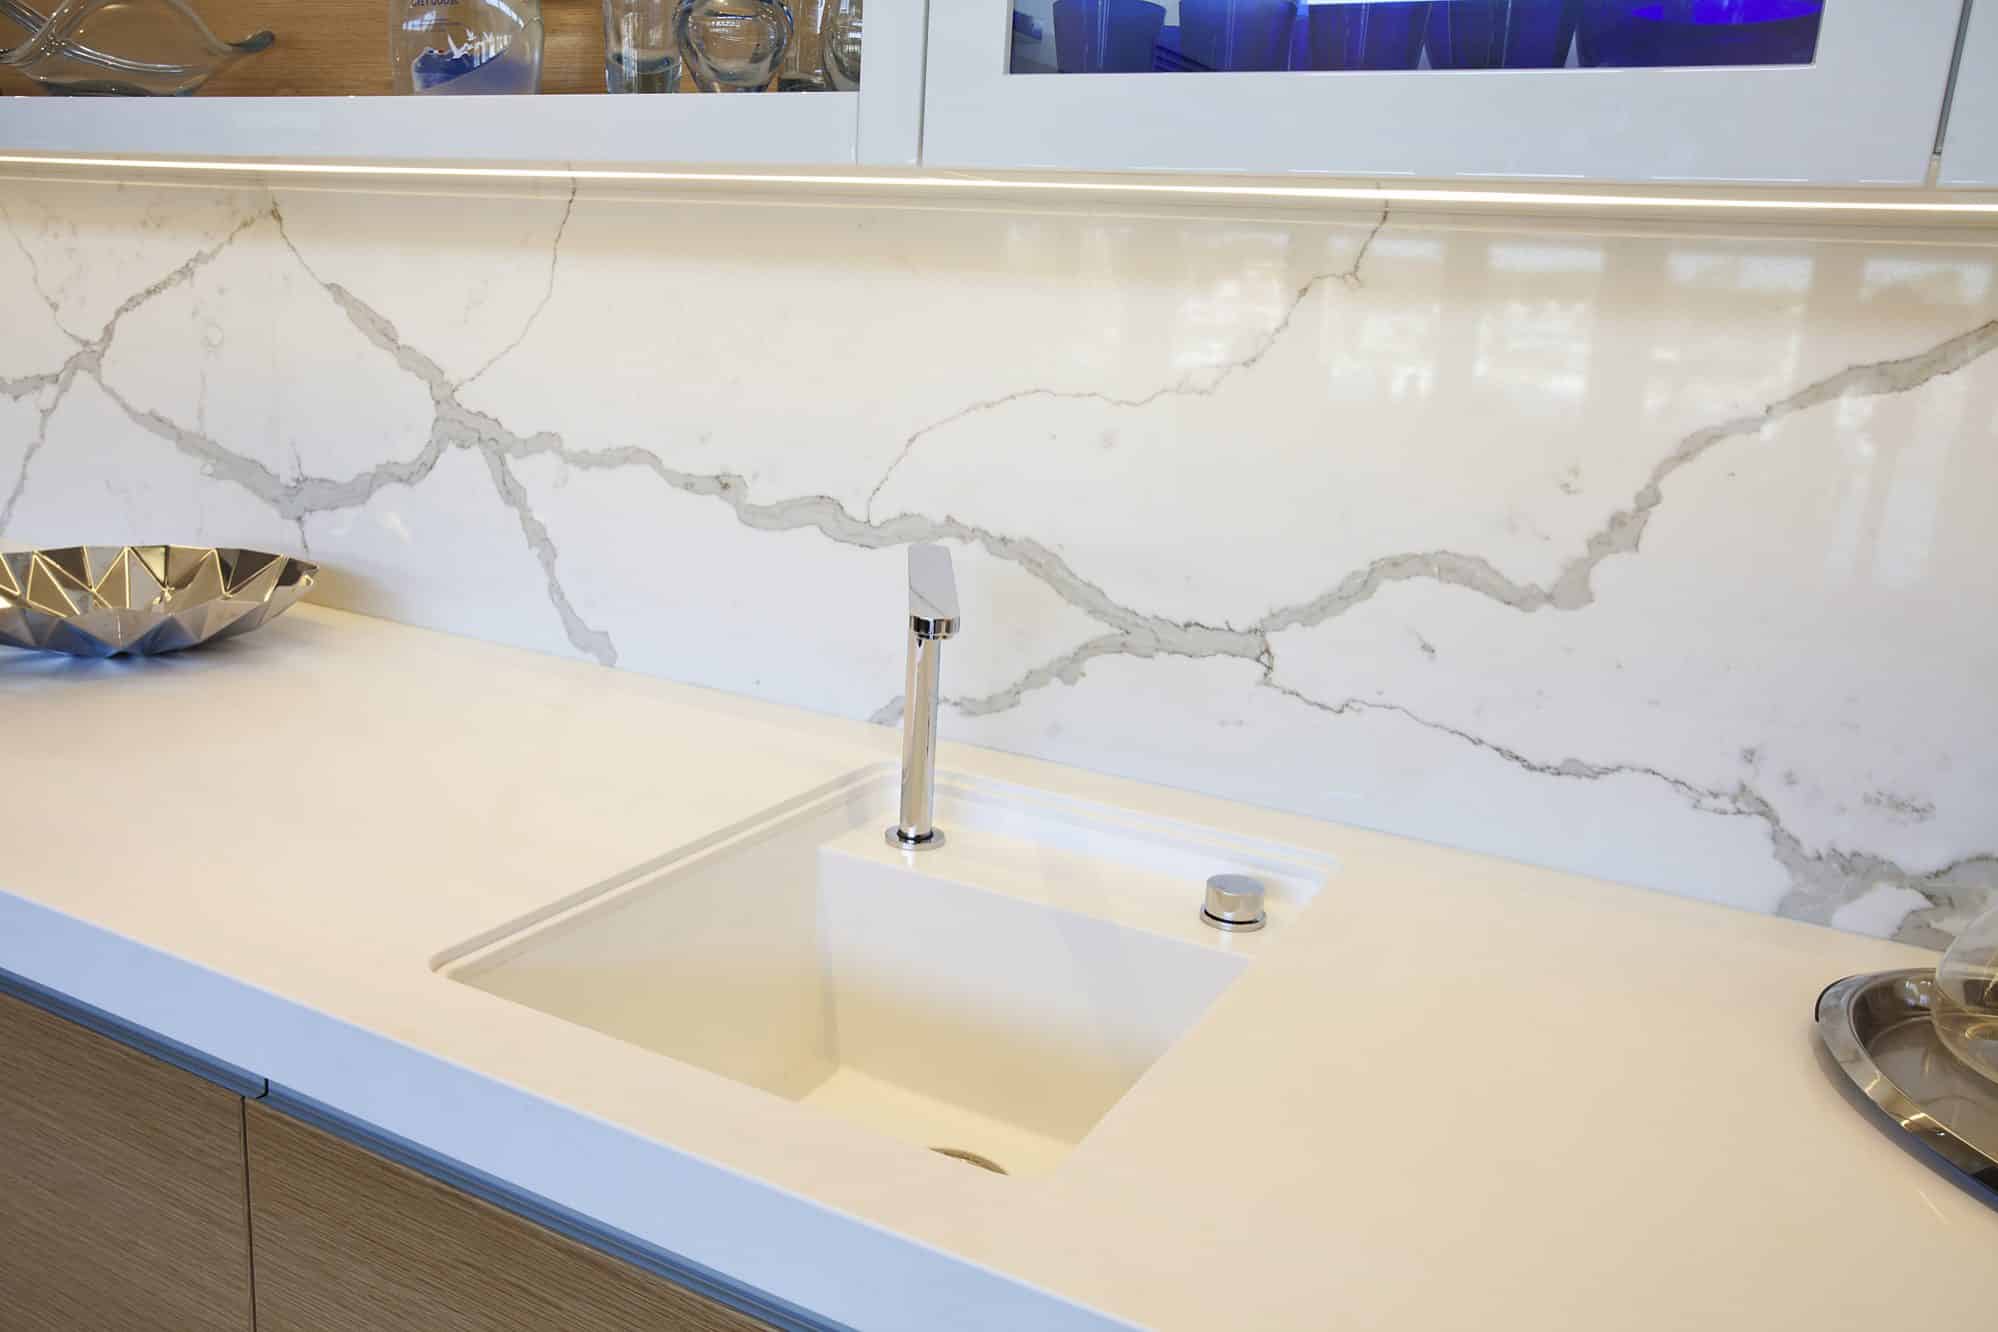 Custom sink with pop up tap